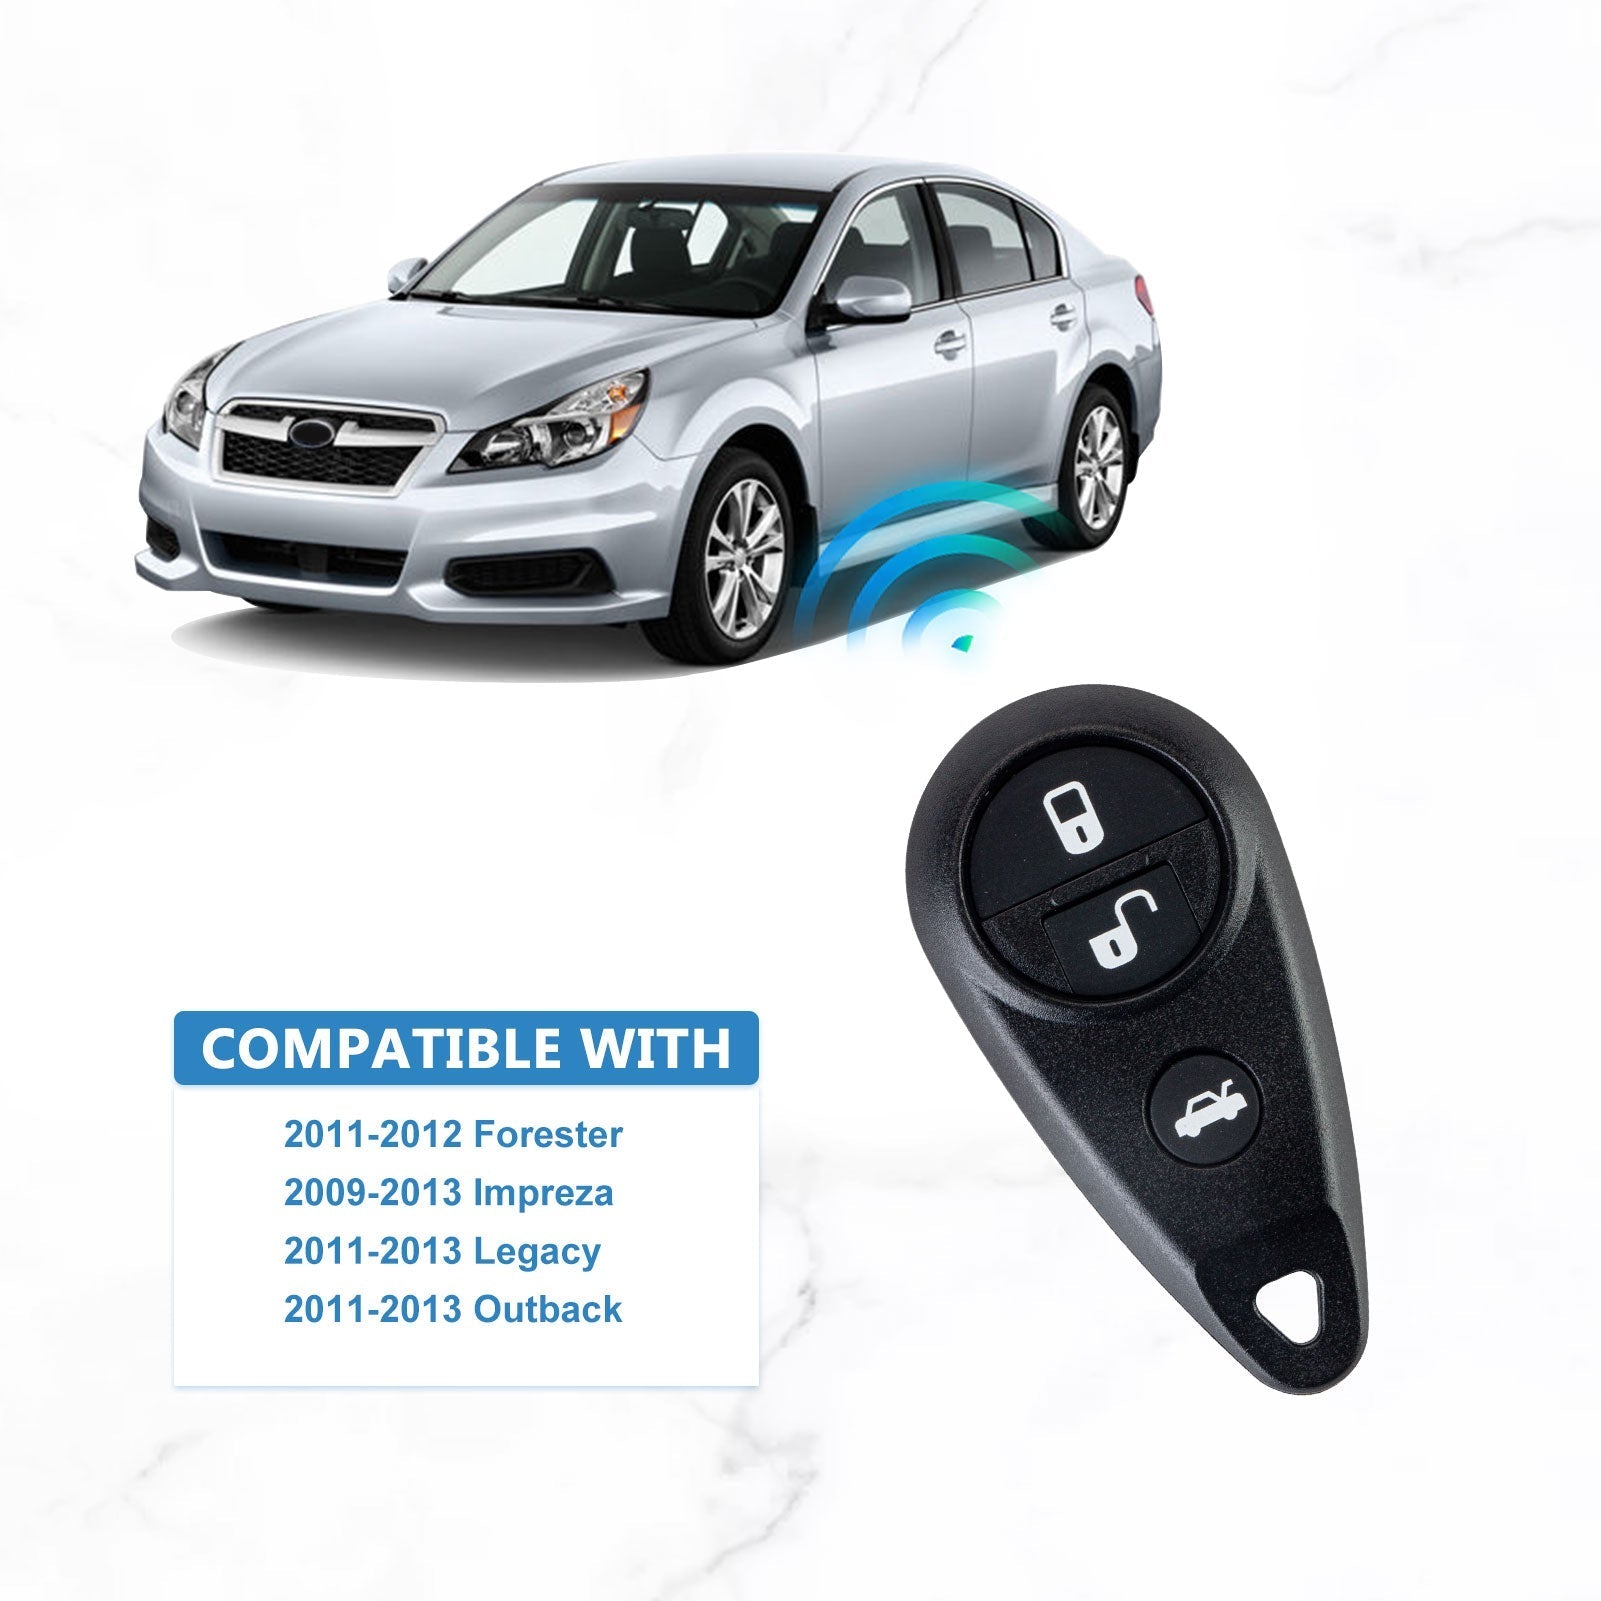 Car Key Fob 433MHZ Replacement for 2011-2012 Forester/2009-2013 Impreza/2011-2013 Legacy/2011-2013 Outback CWTWB1U819  KR-G4RD-10